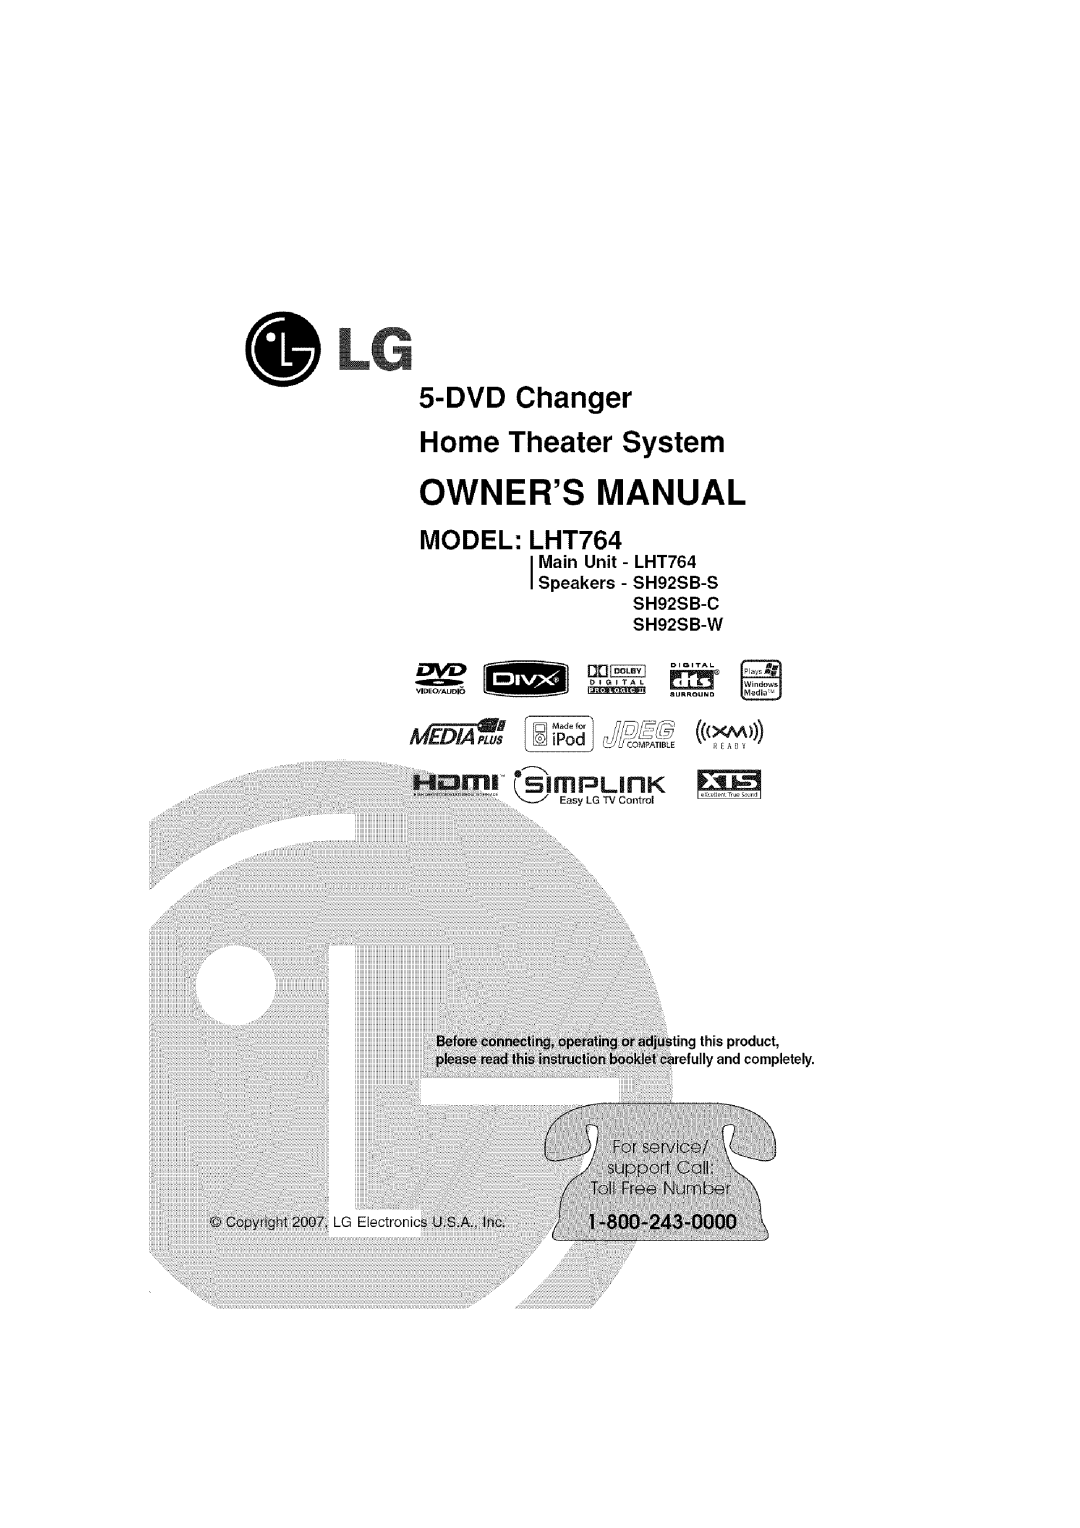 LG Electronics owner manual Owners Manual, DVDChanger Home Theater System, MODEL: LHT764, SH92SB-W 